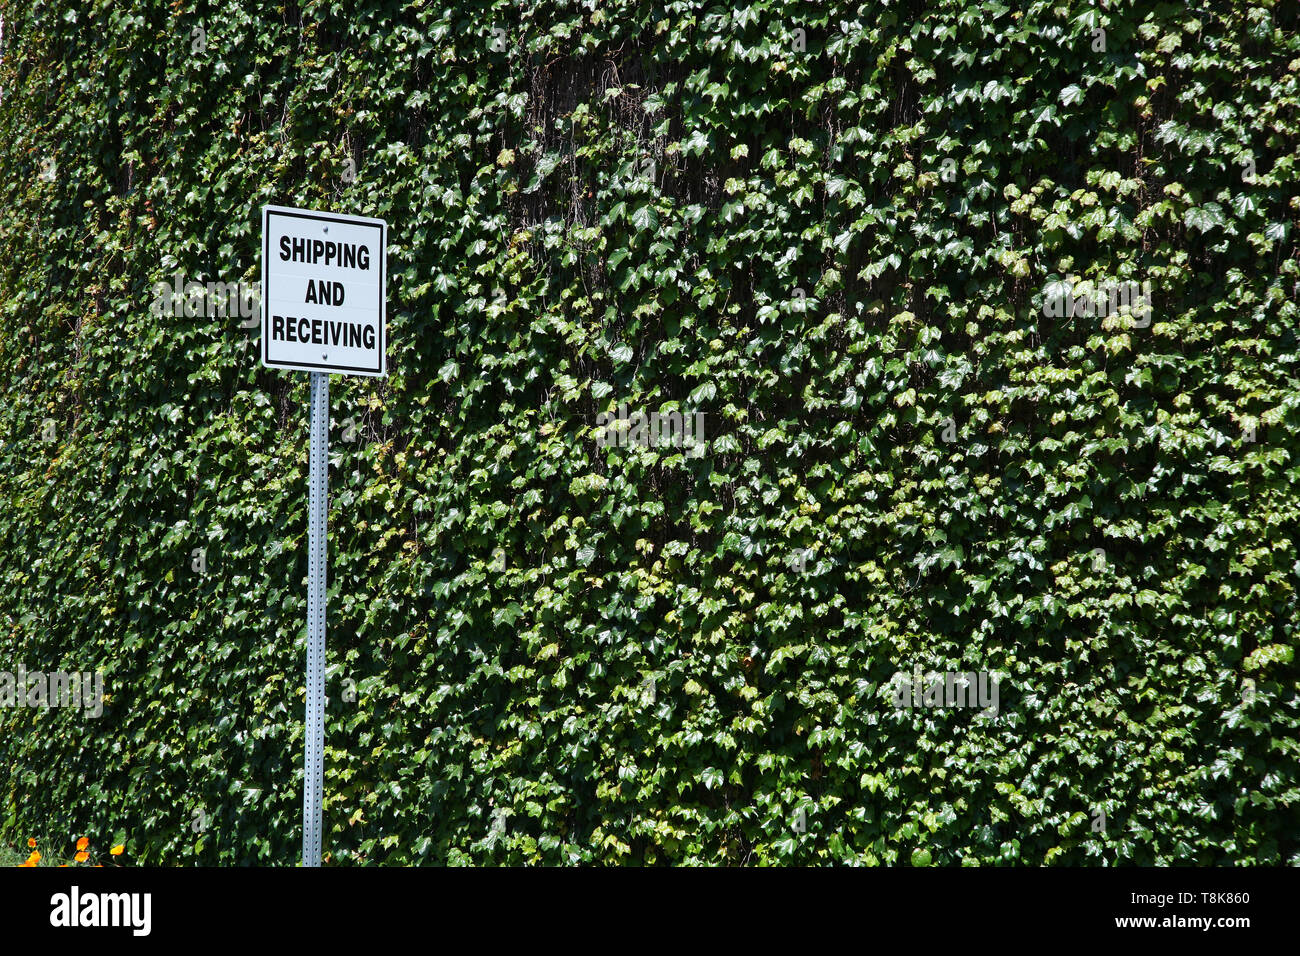 Shipping and receiving sign against wall of ivy Stock Photo